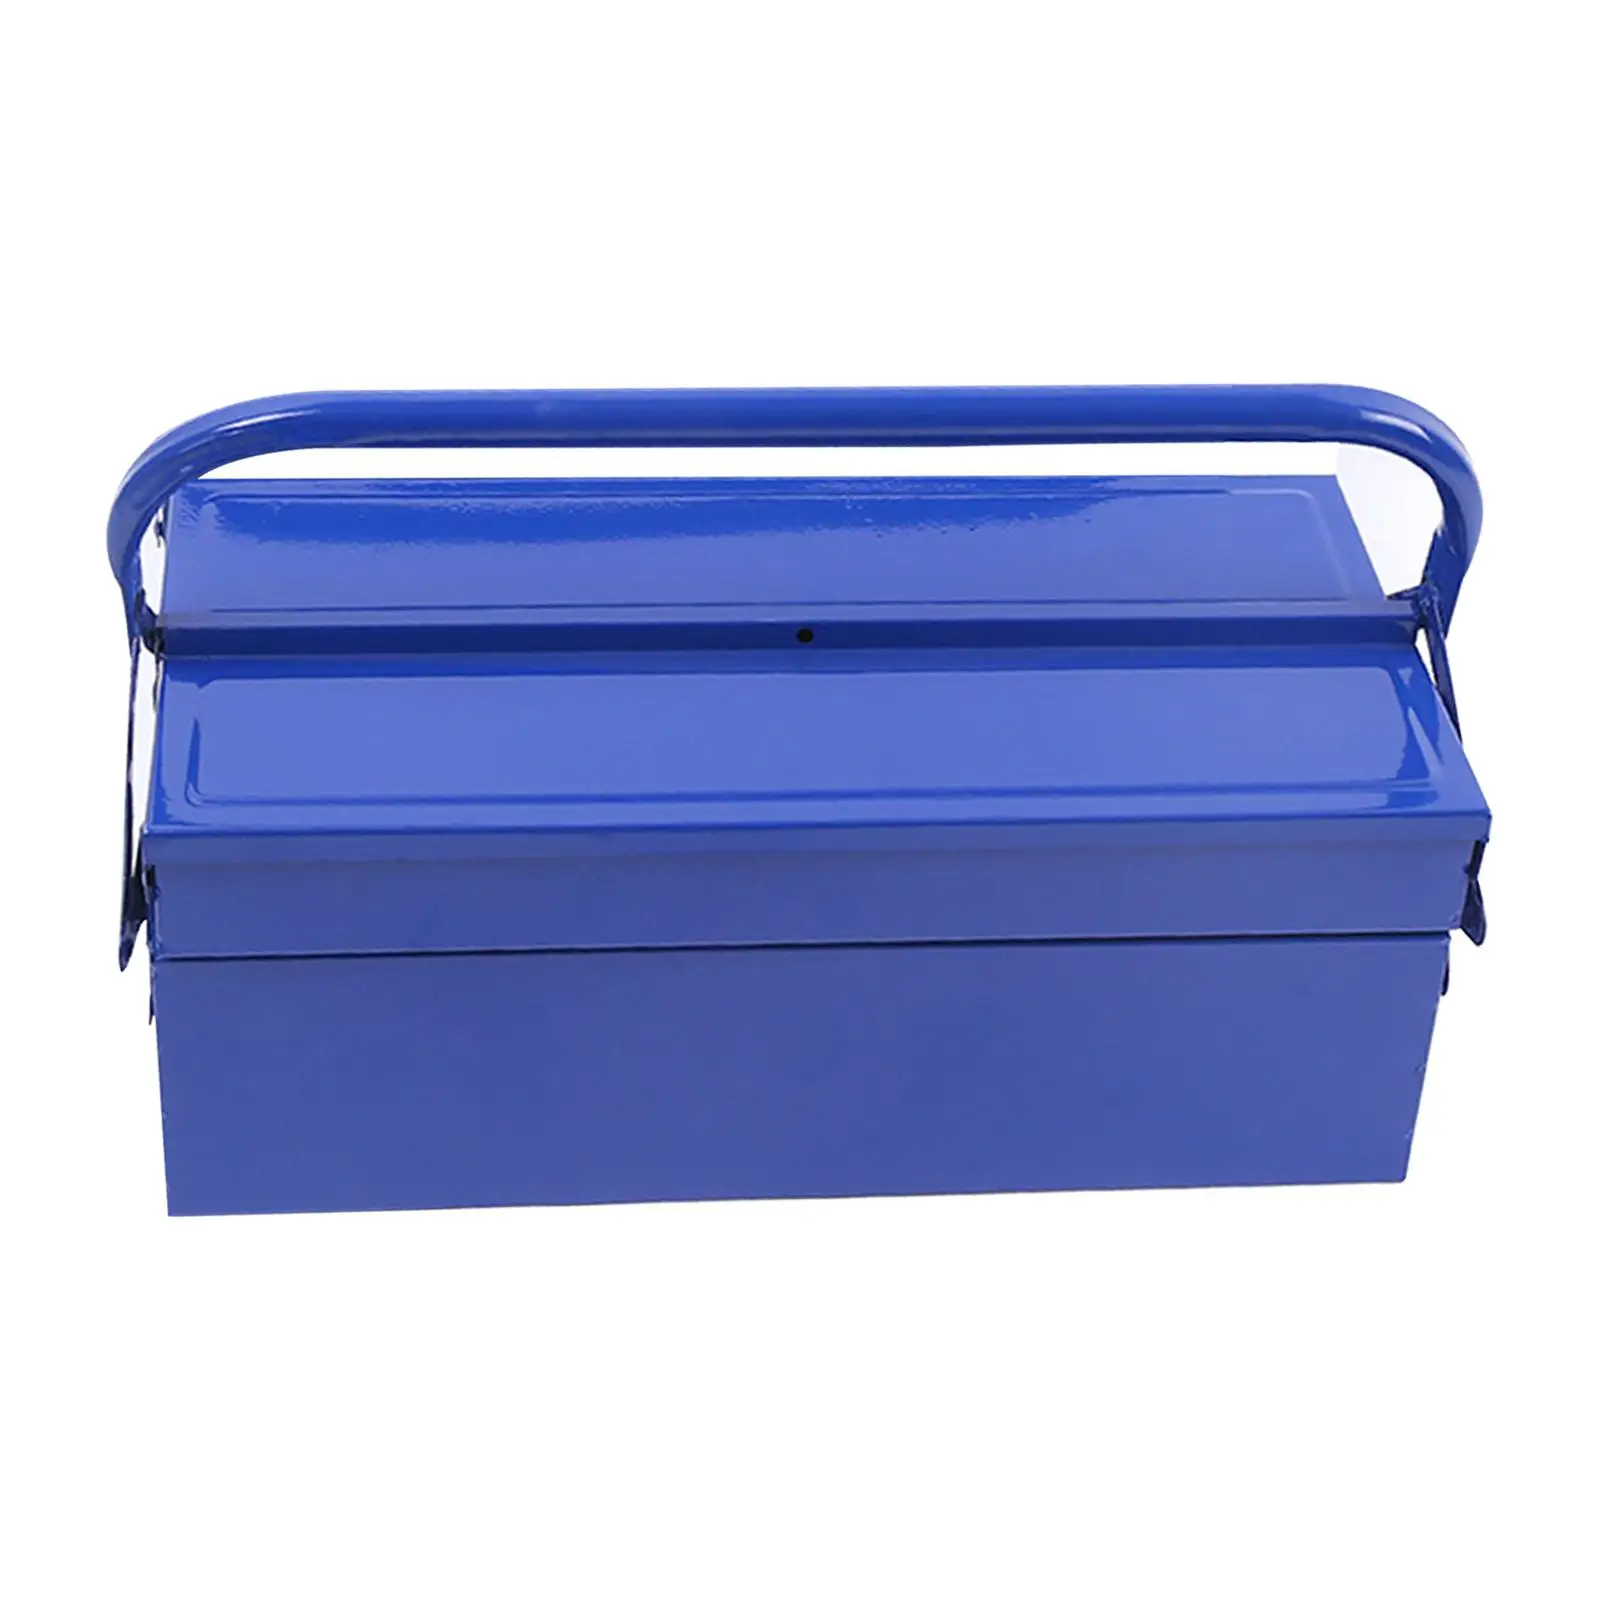 Tool Box Lightweight Multipurpose Iron with Handle Hardware Organizer Drawer Large Space for Household Plumber Car